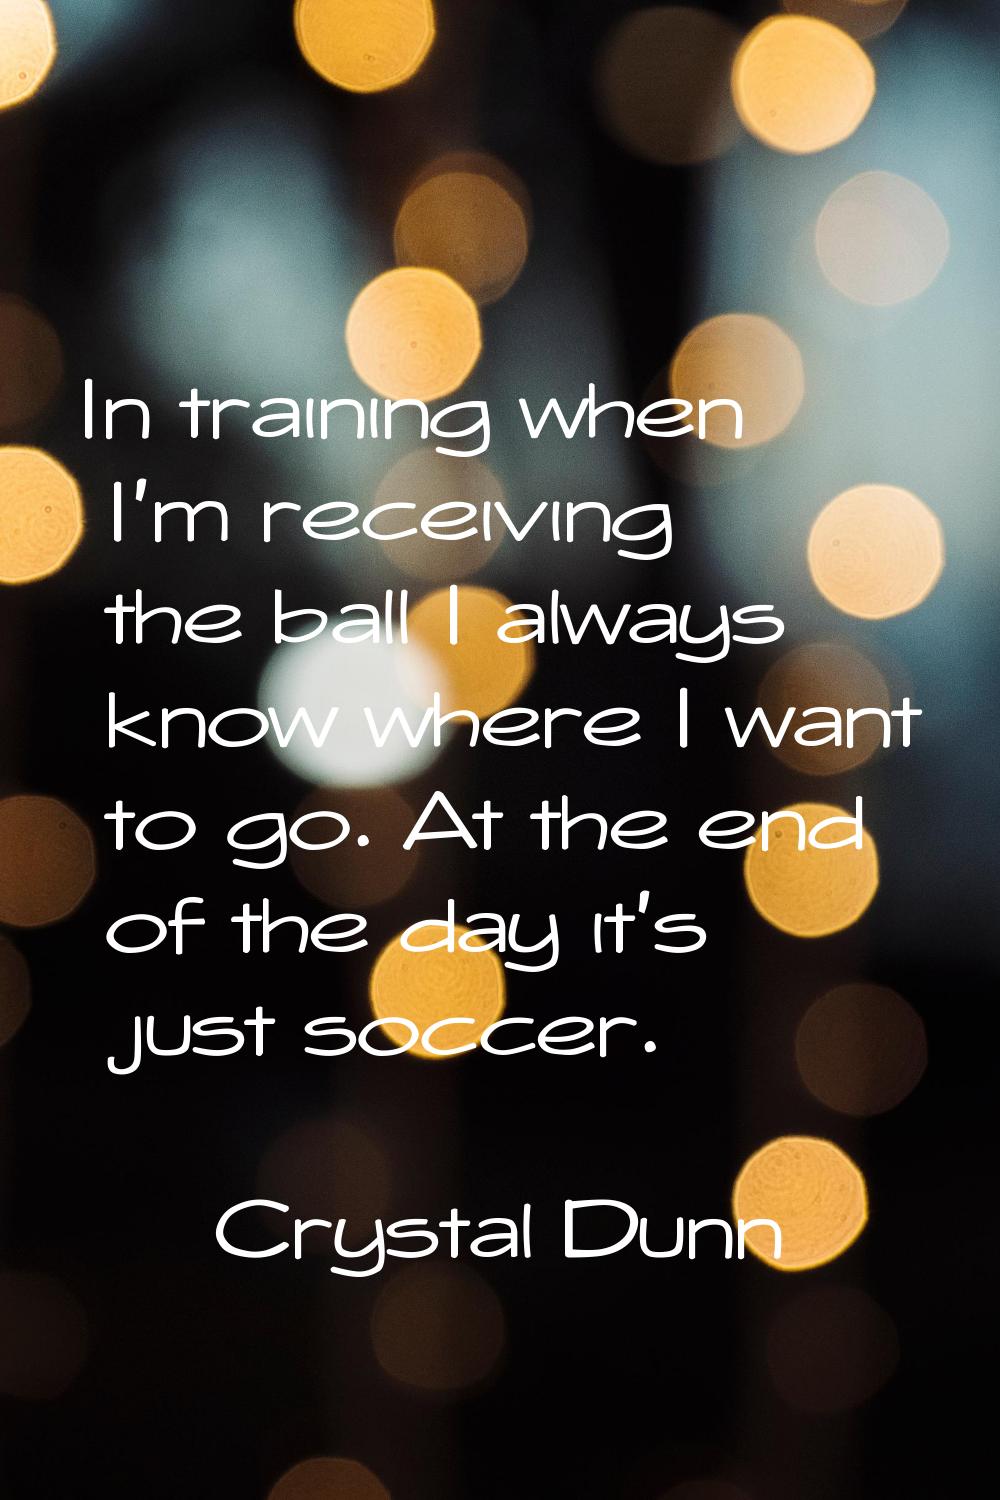 In training when I'm receiving the ball I always know where I want to go. At the end of the day it'